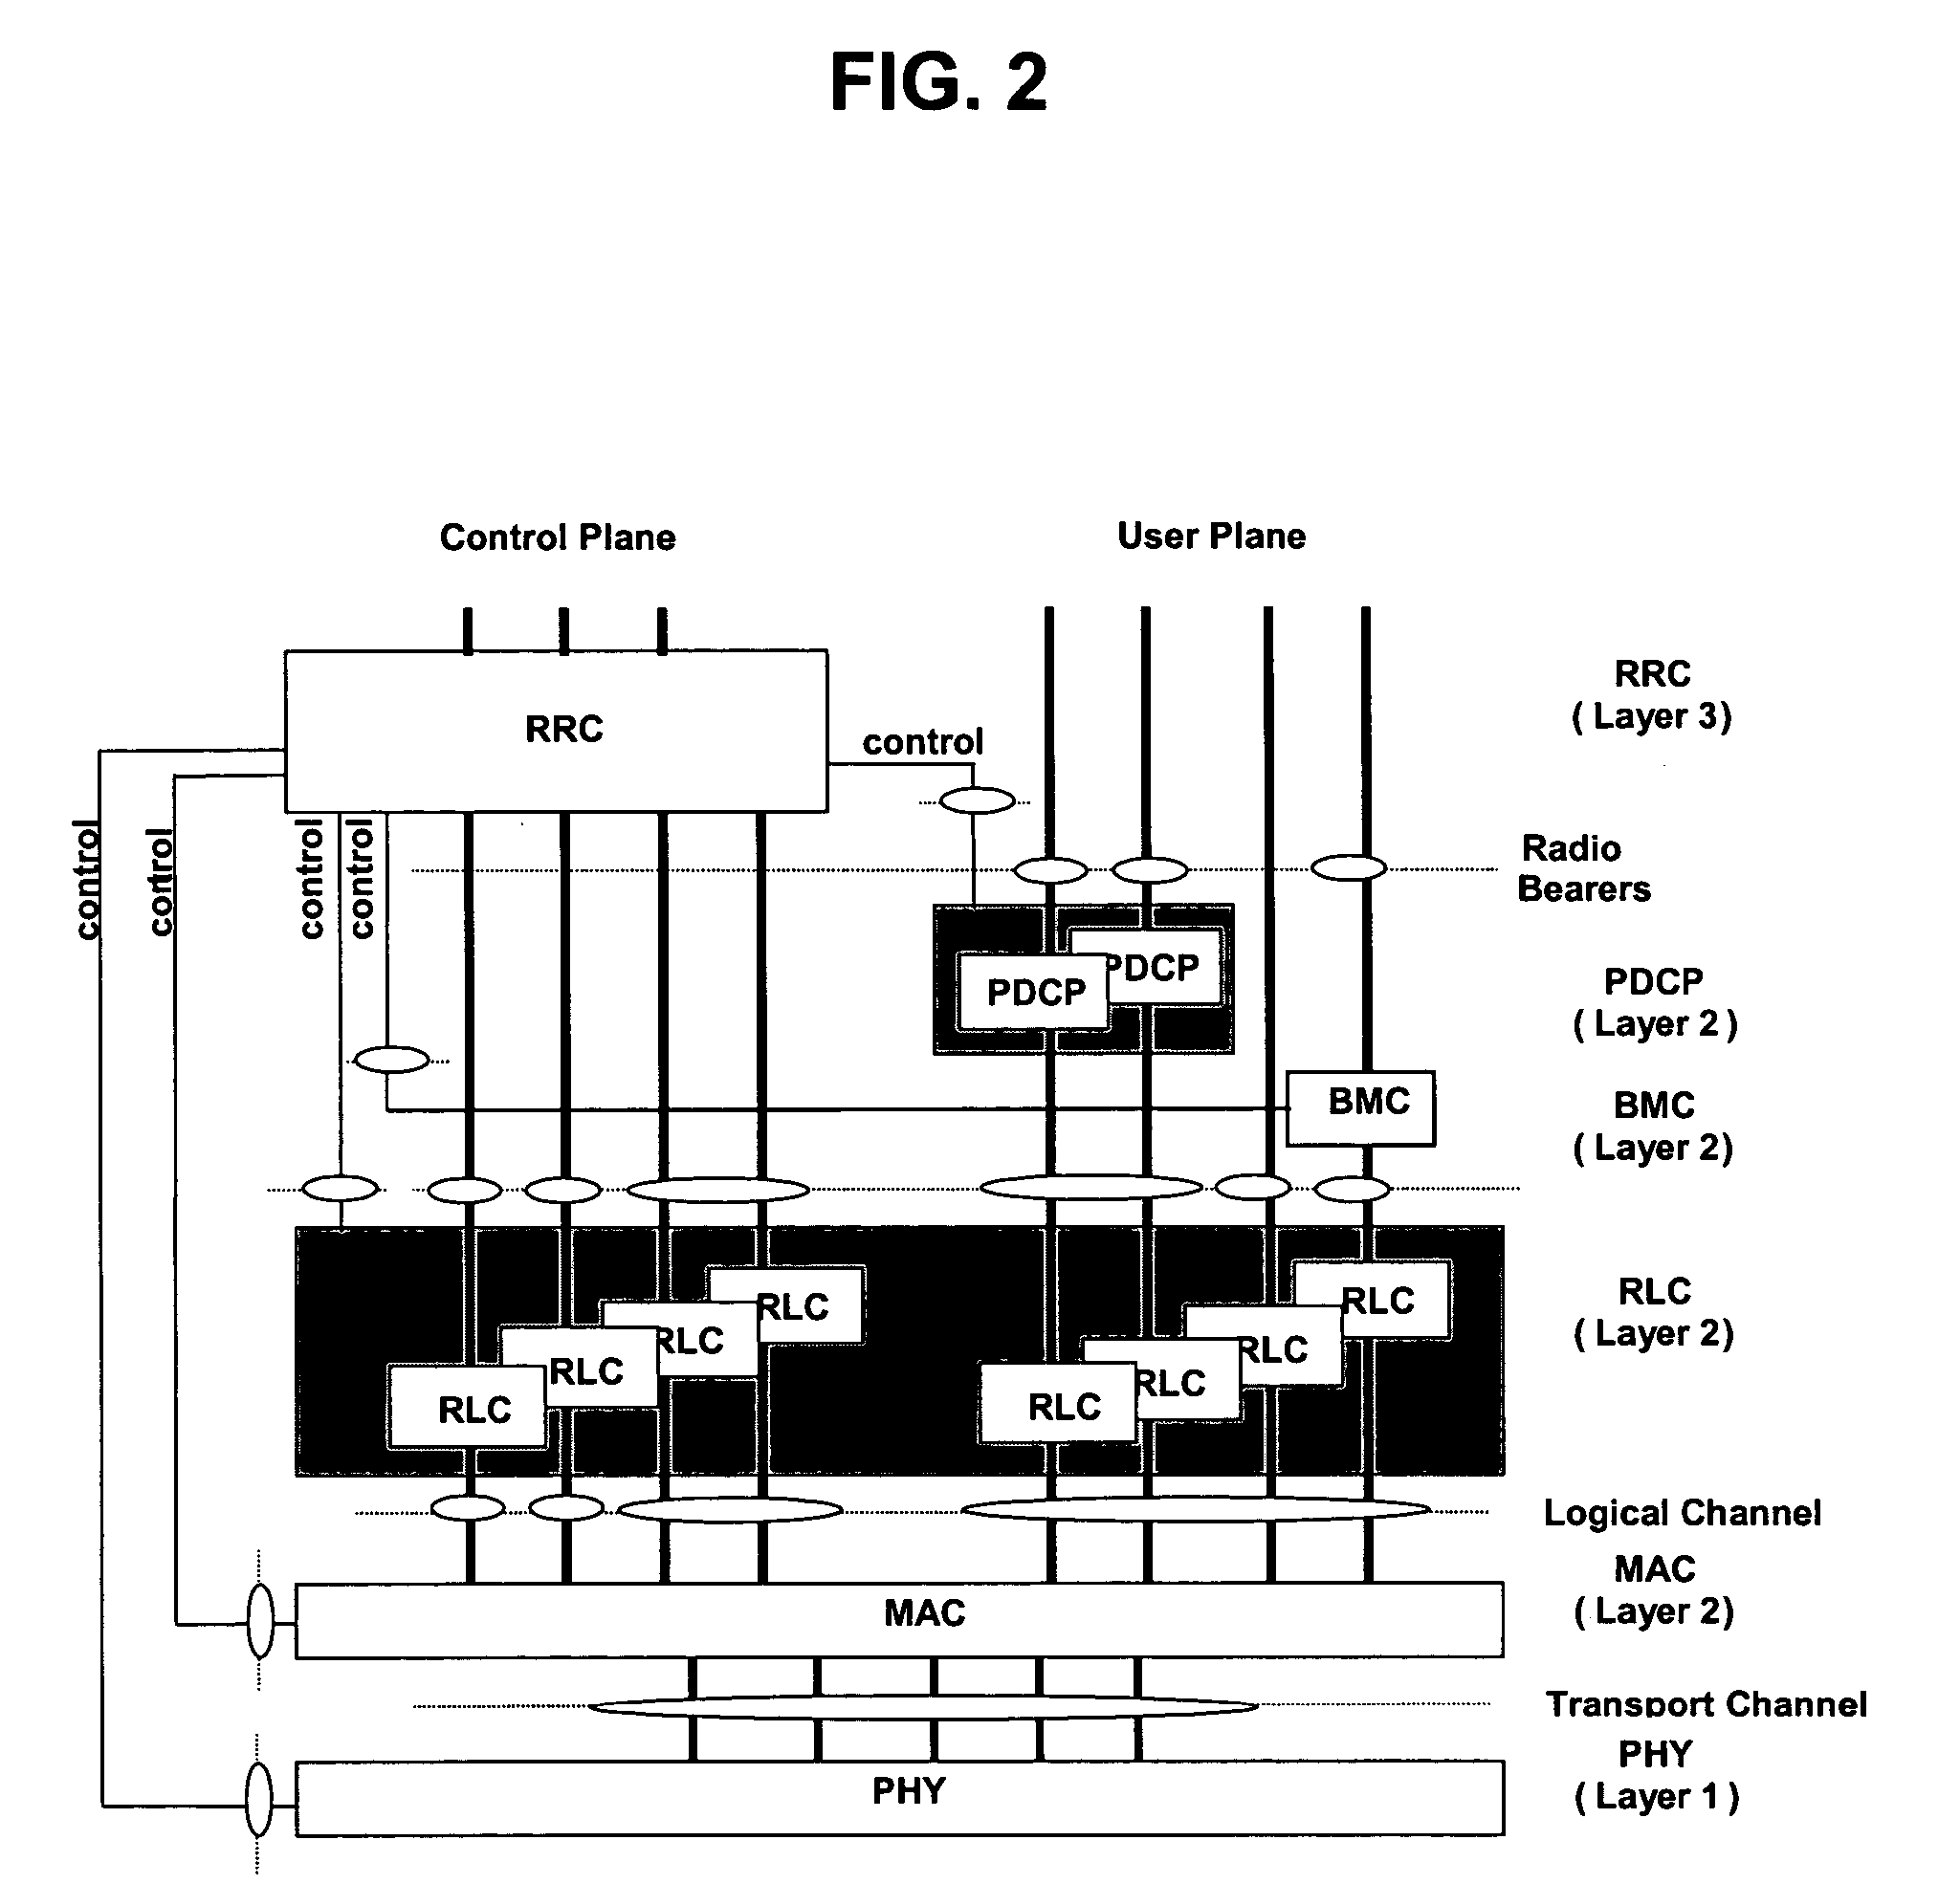 Apparatus and method for transmitting data blocks based on priority